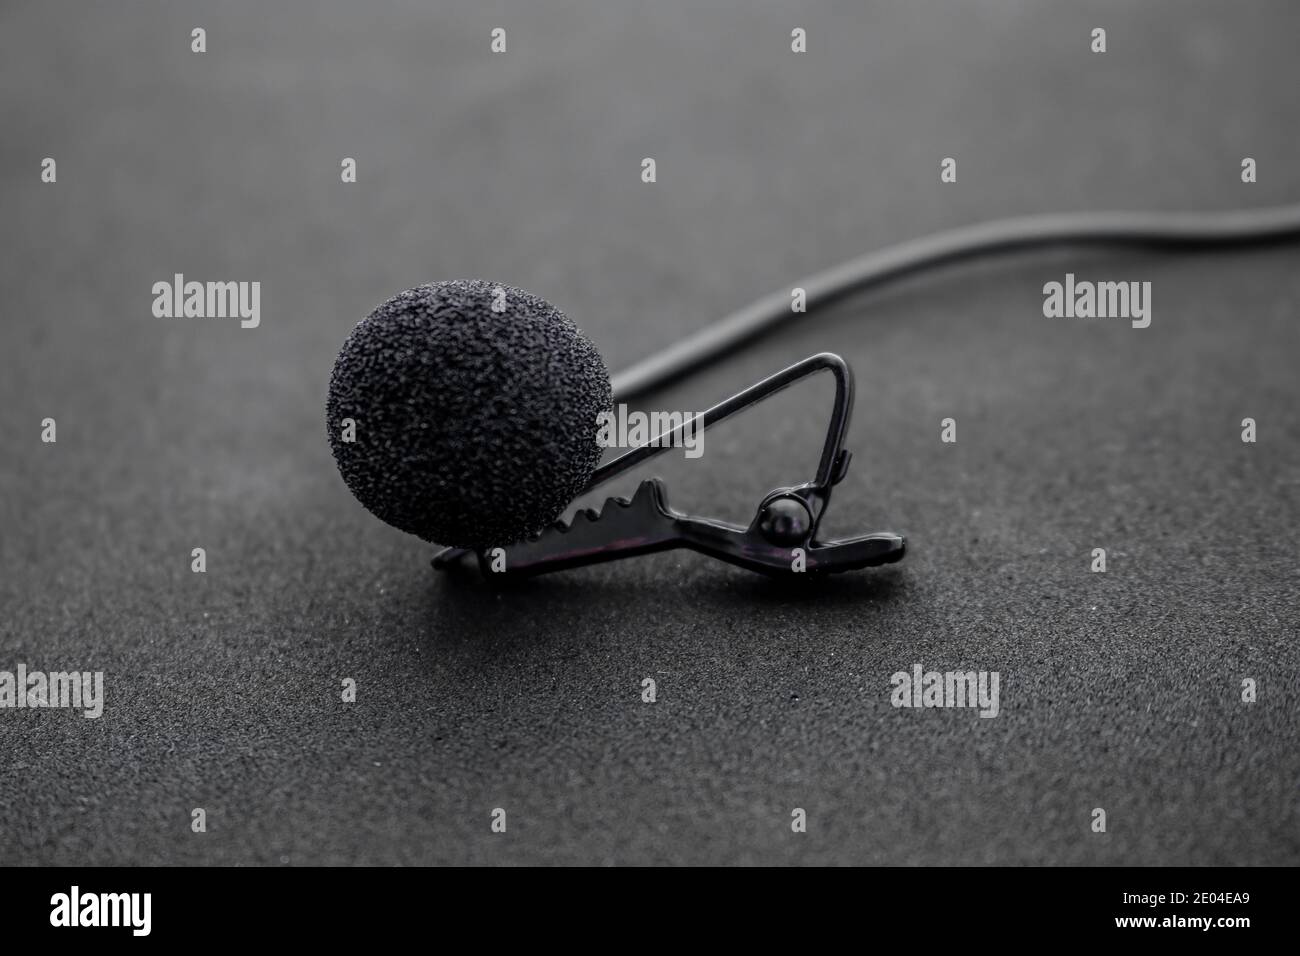 Lavalier or lapel microphone on a black surface, very close-up. The details of the grip clip or bra and the sponge against the wind are visible. Stock Photo